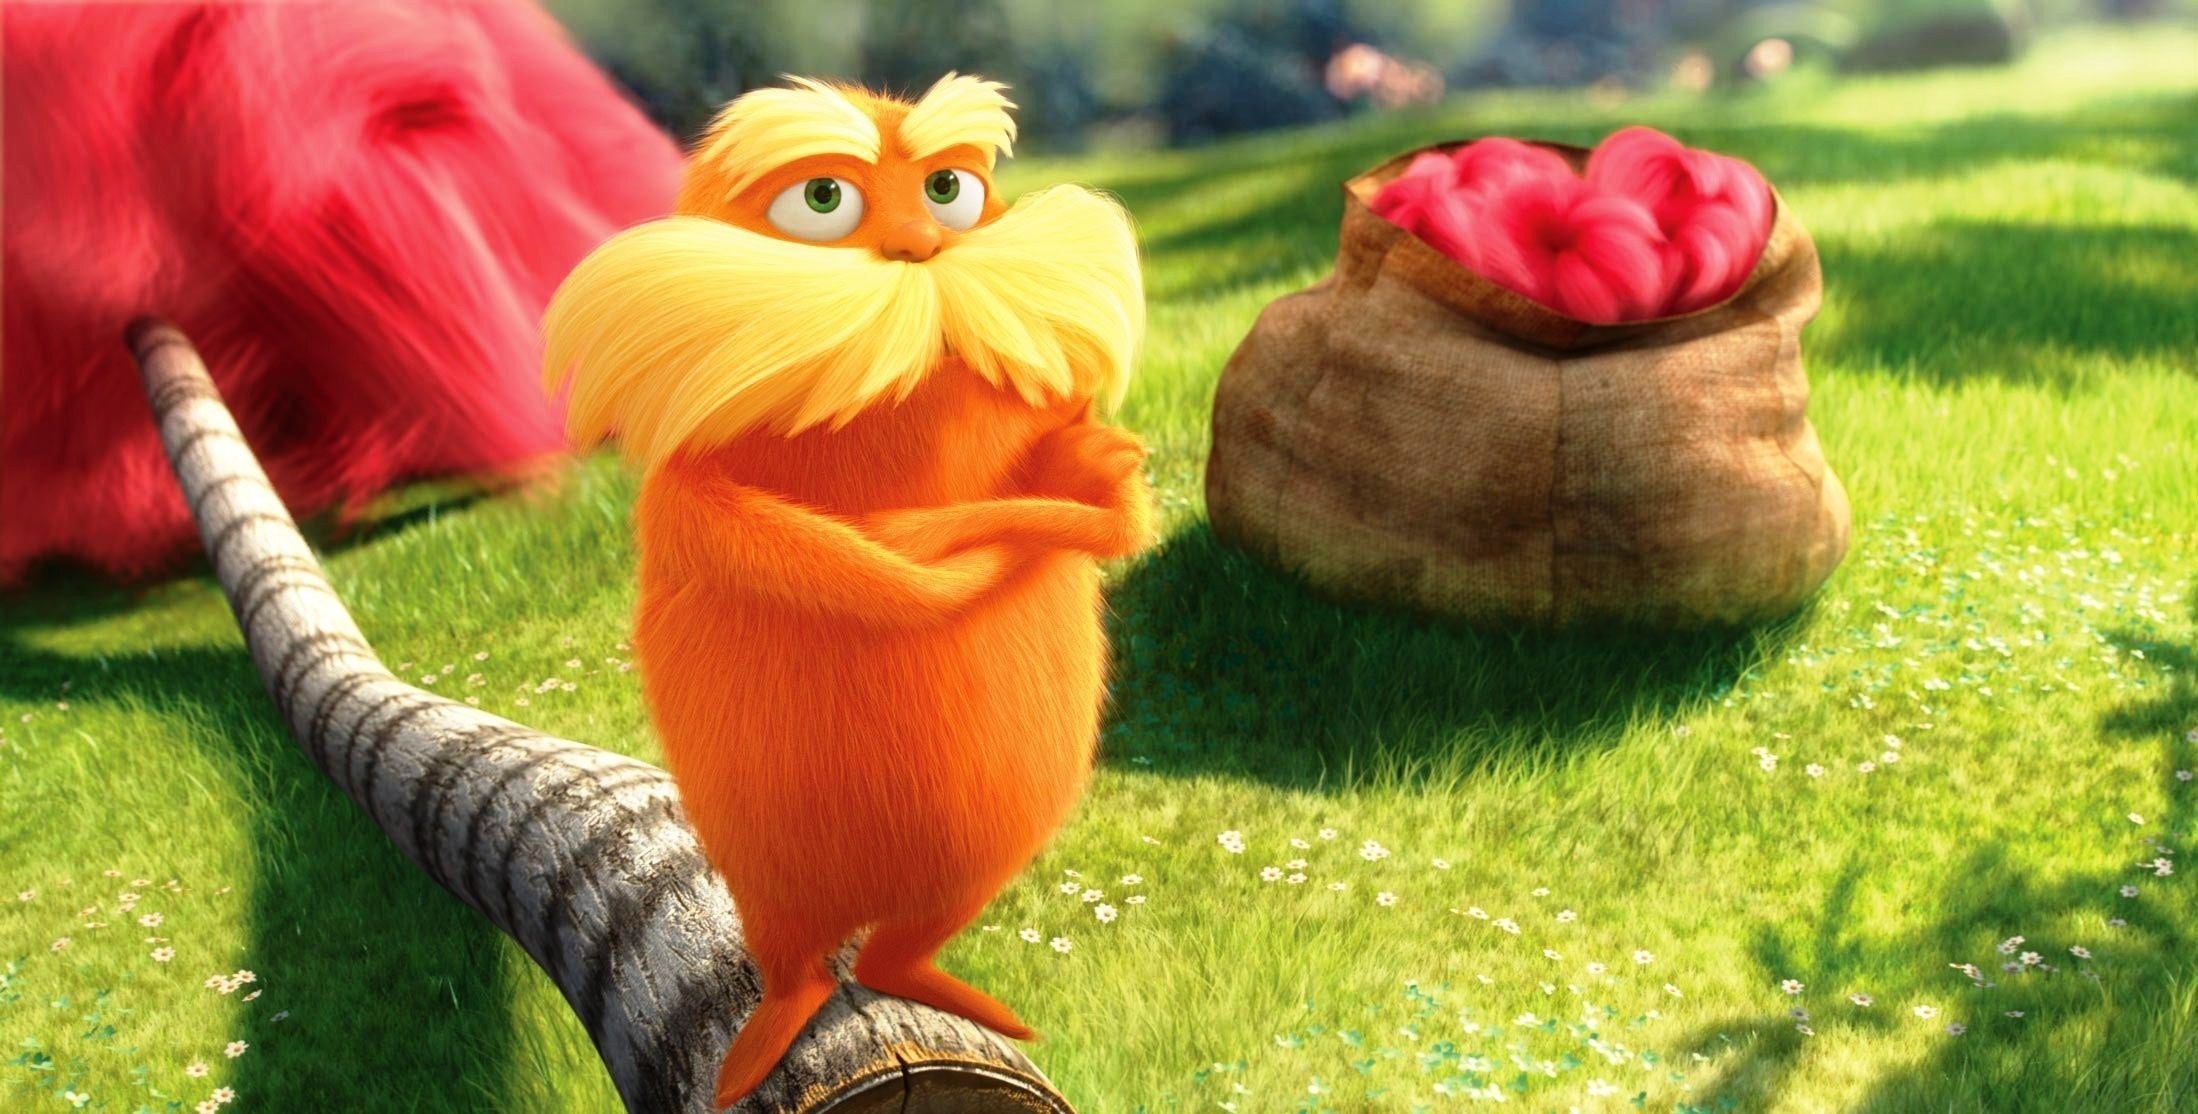 The Lorax HD Wallpaper Background Image